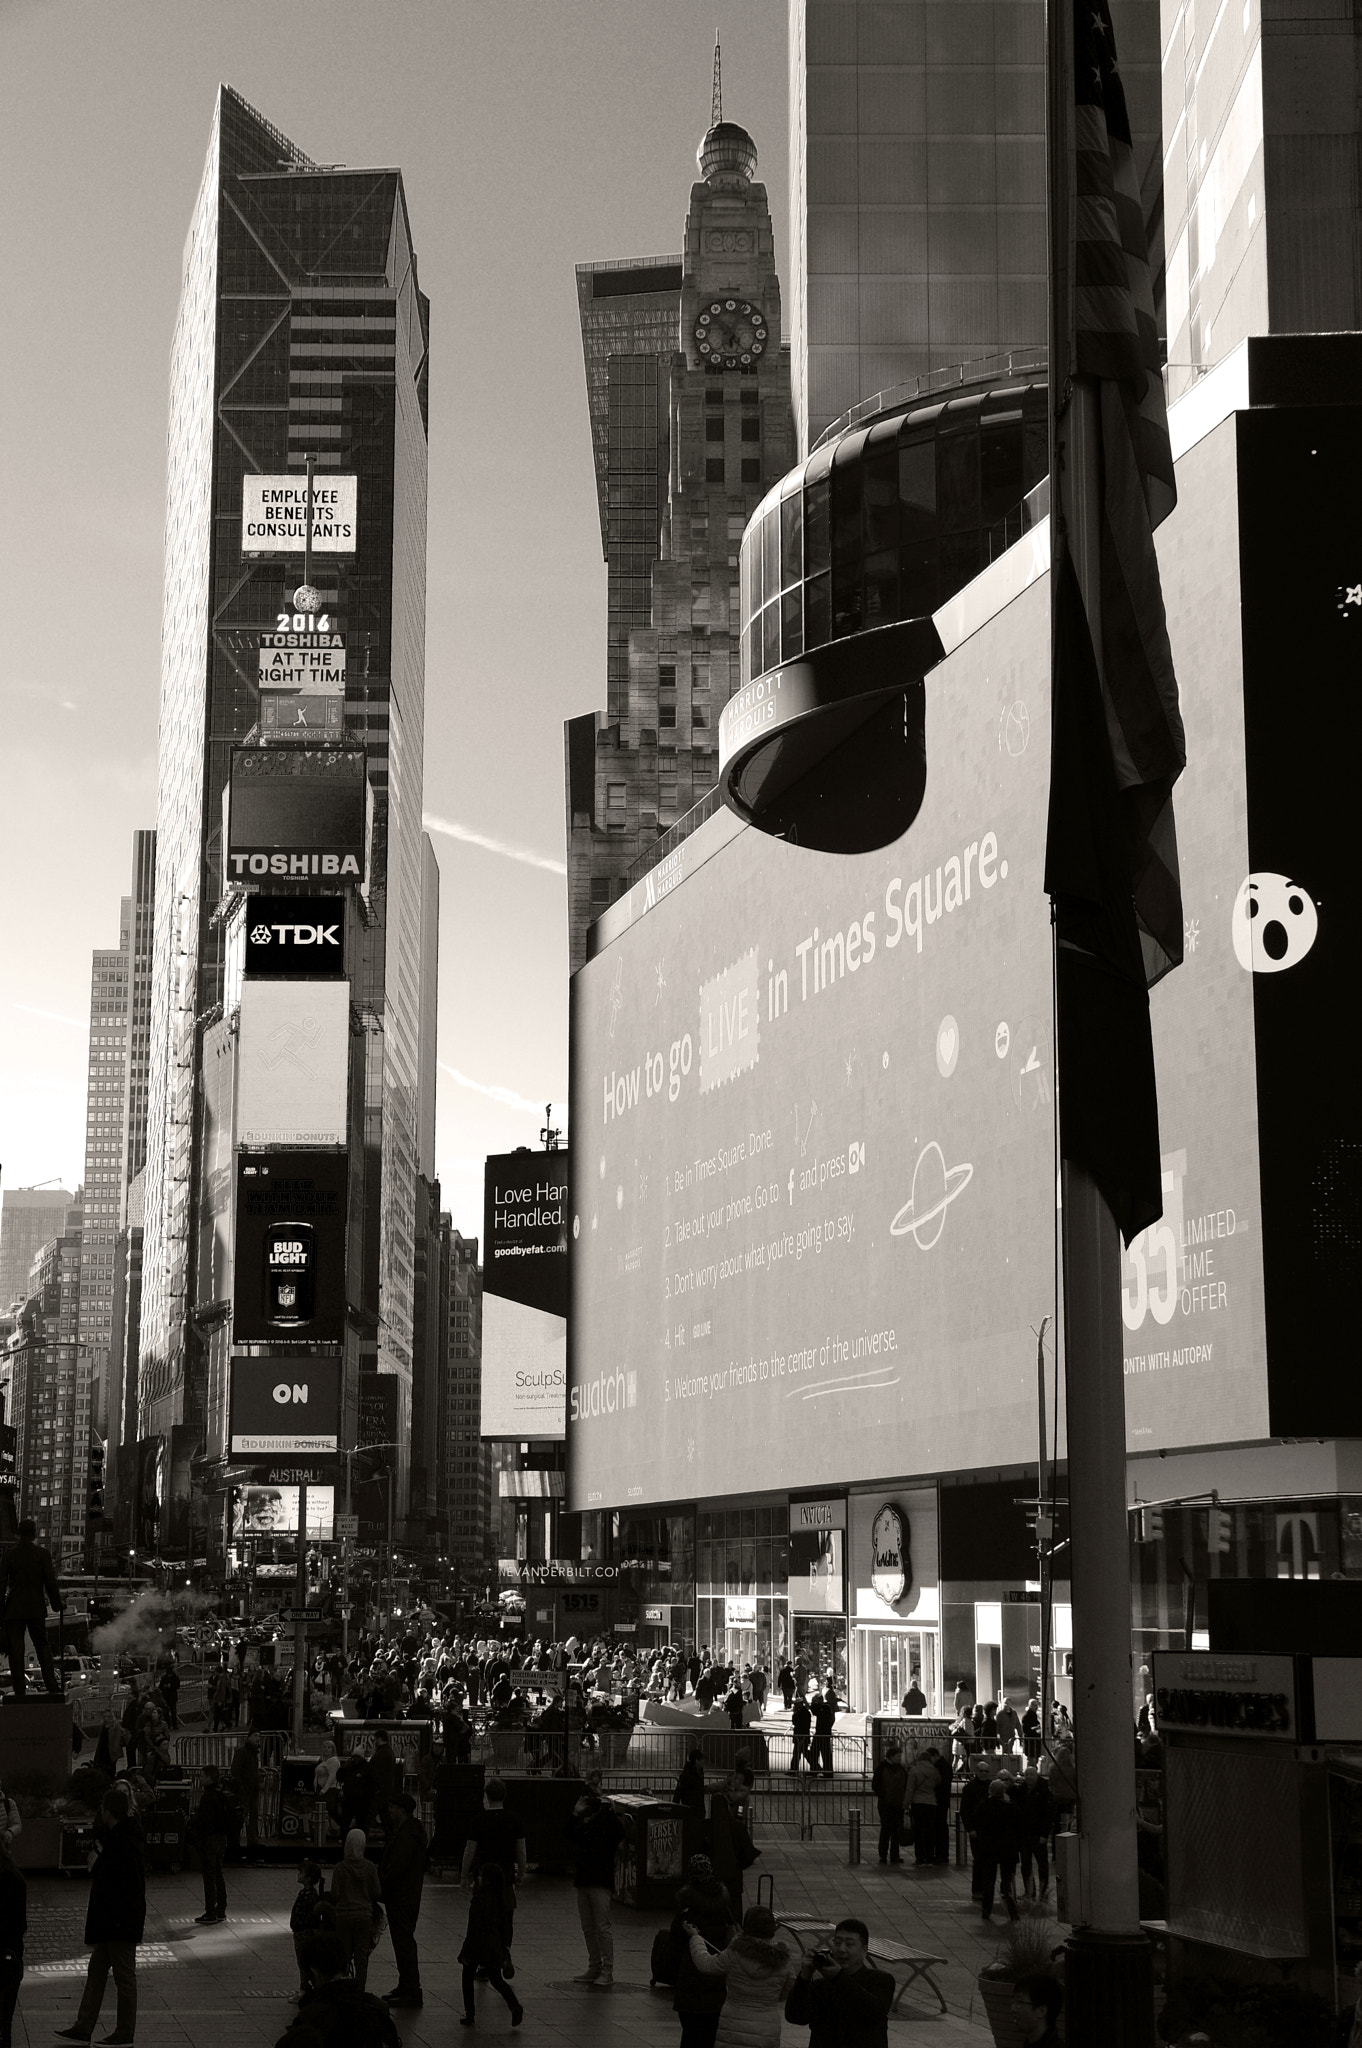 Pentax K-3 II sample photo. Through the bowtie (of times square) photography